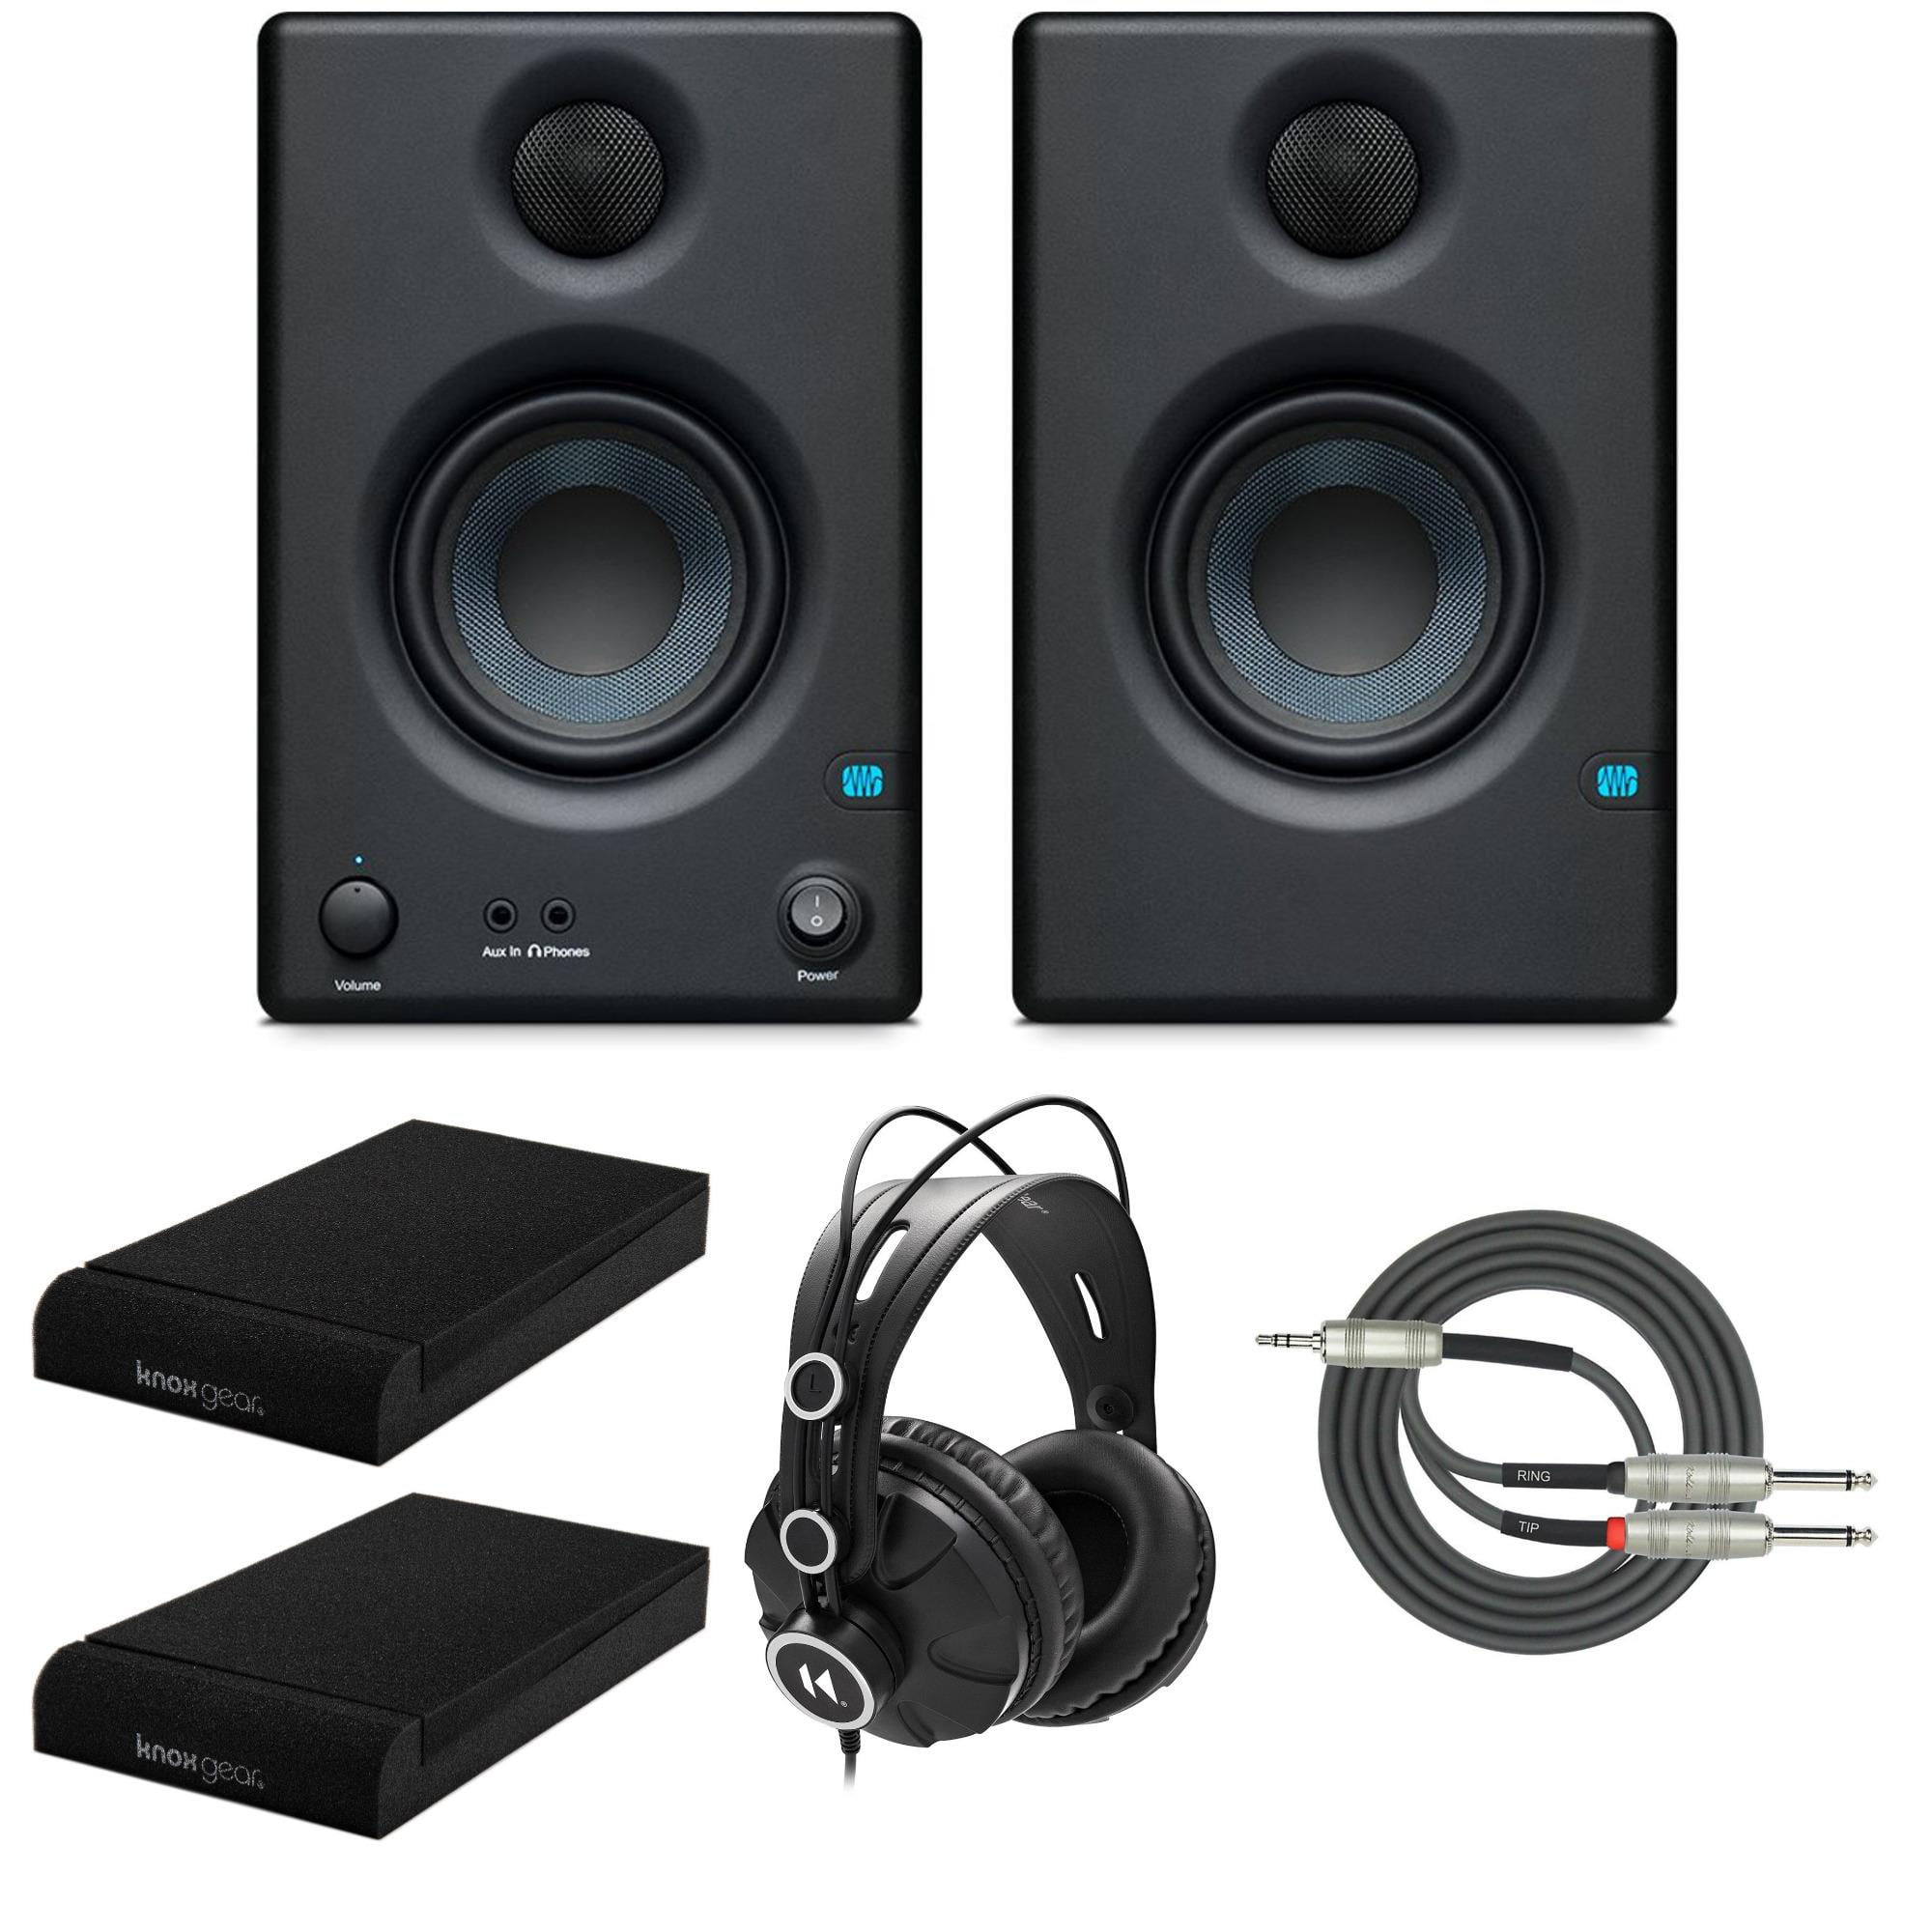 PreSonus Eris E3.5 BT-3.5-Inch Near Field Studio Monitors with Bluetooth 50W Power Class AB Amplification with EMB RCA Cable and Gravity Magnet Phone Holder Bundle 25 W/Side